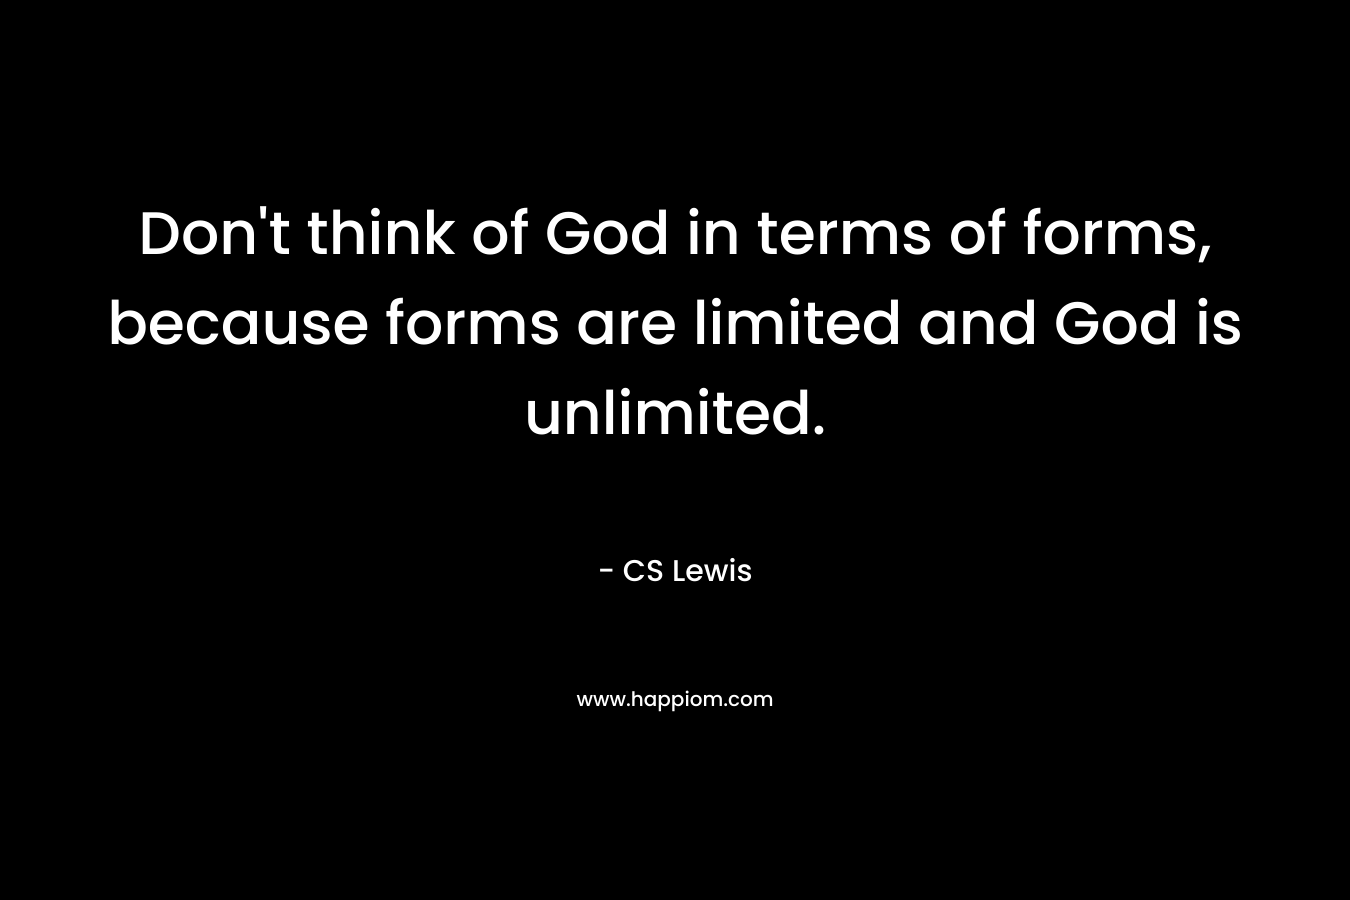 Don't think of God in terms of forms, because forms are limited and God is unlimited.